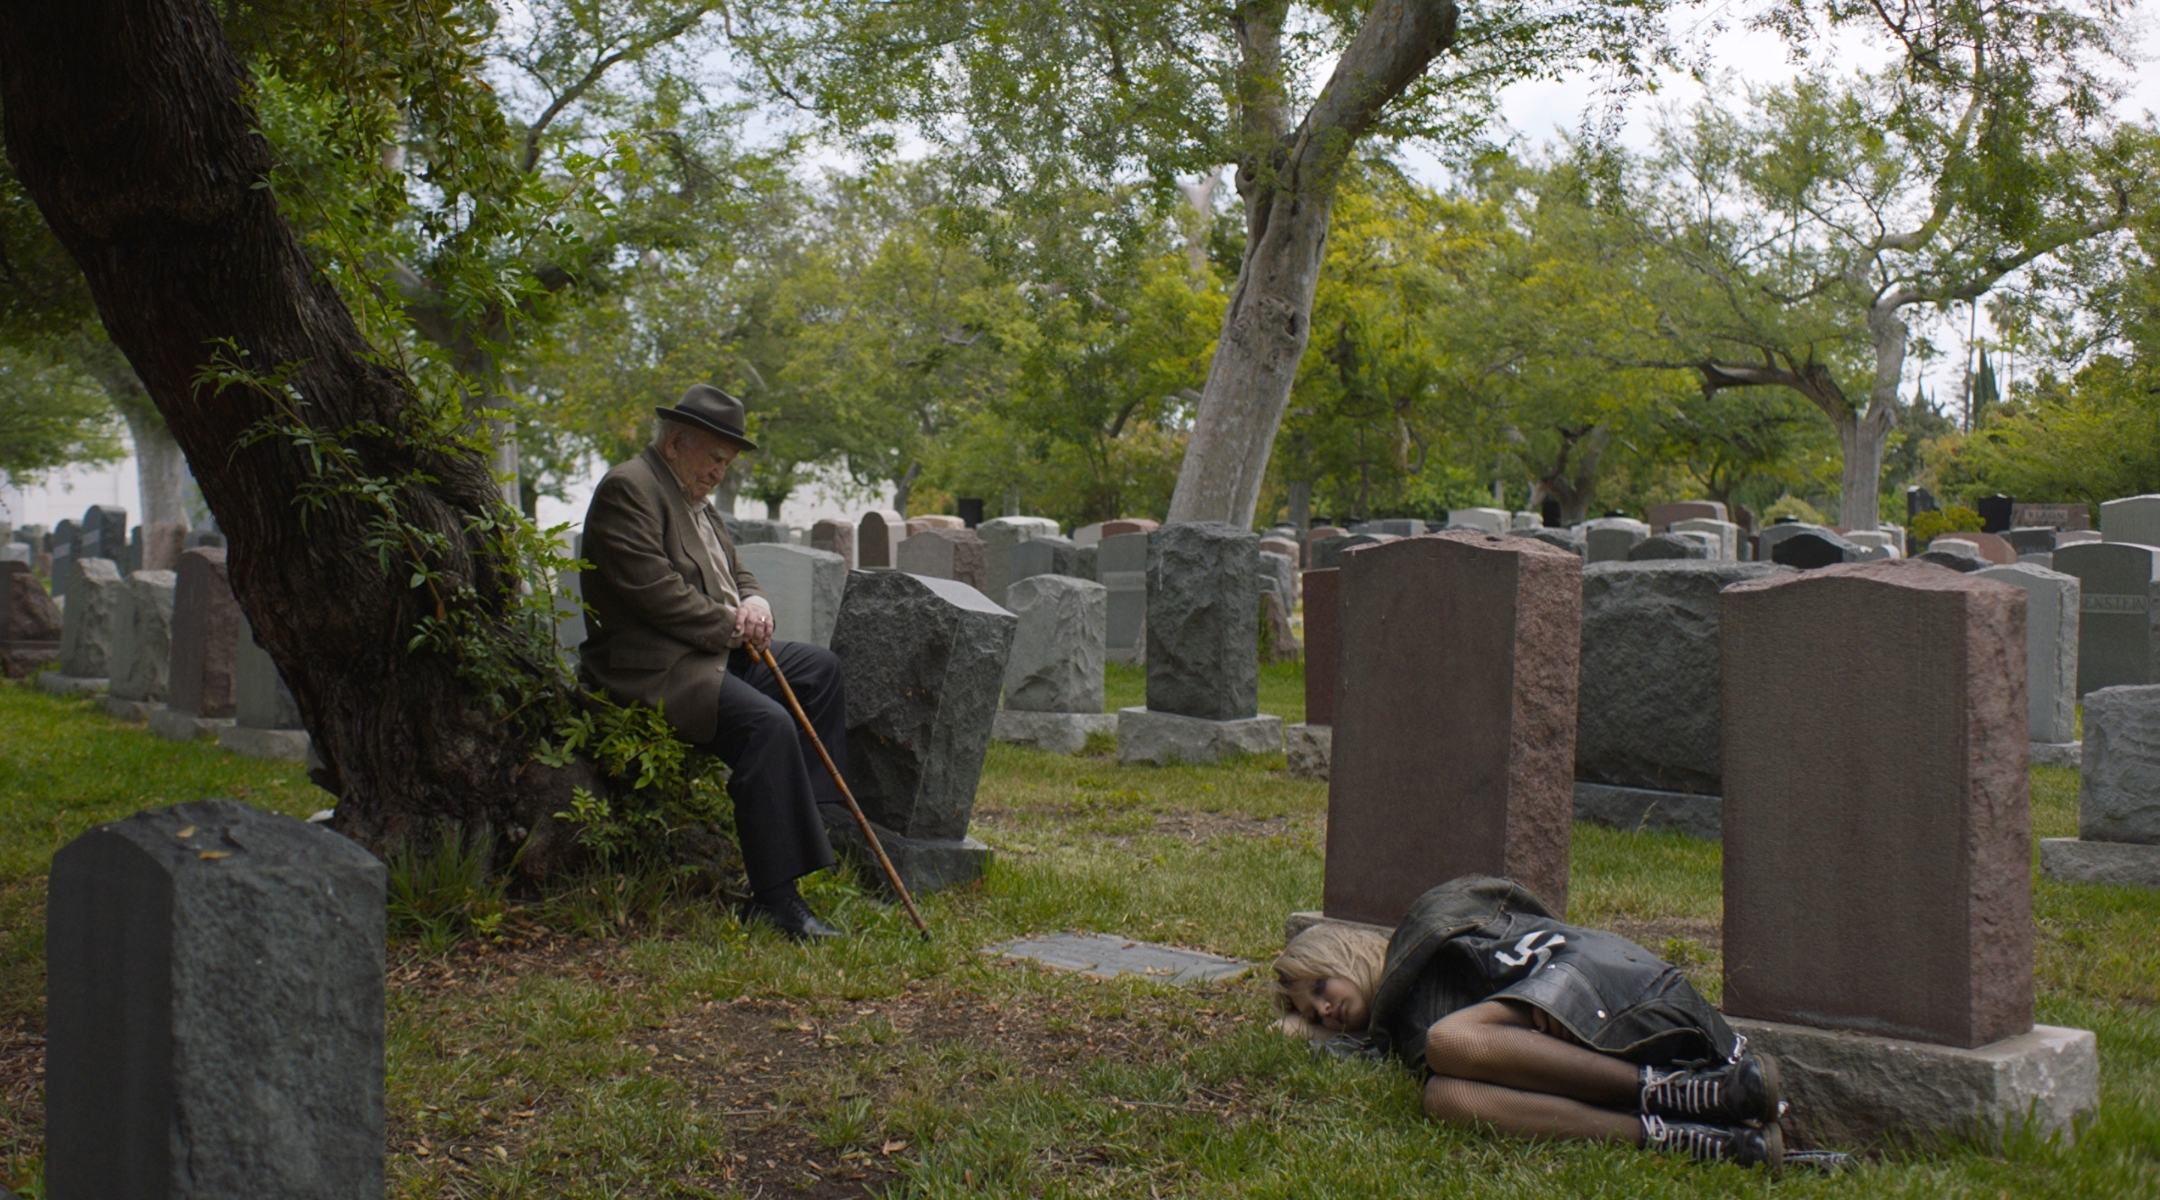 Samuel (Ed Asner) discovers Casey (Margot Josefsohn) sleeping in a cemetery in a scene from “Tiger Within.” (Courtesy of Menemsha Films)